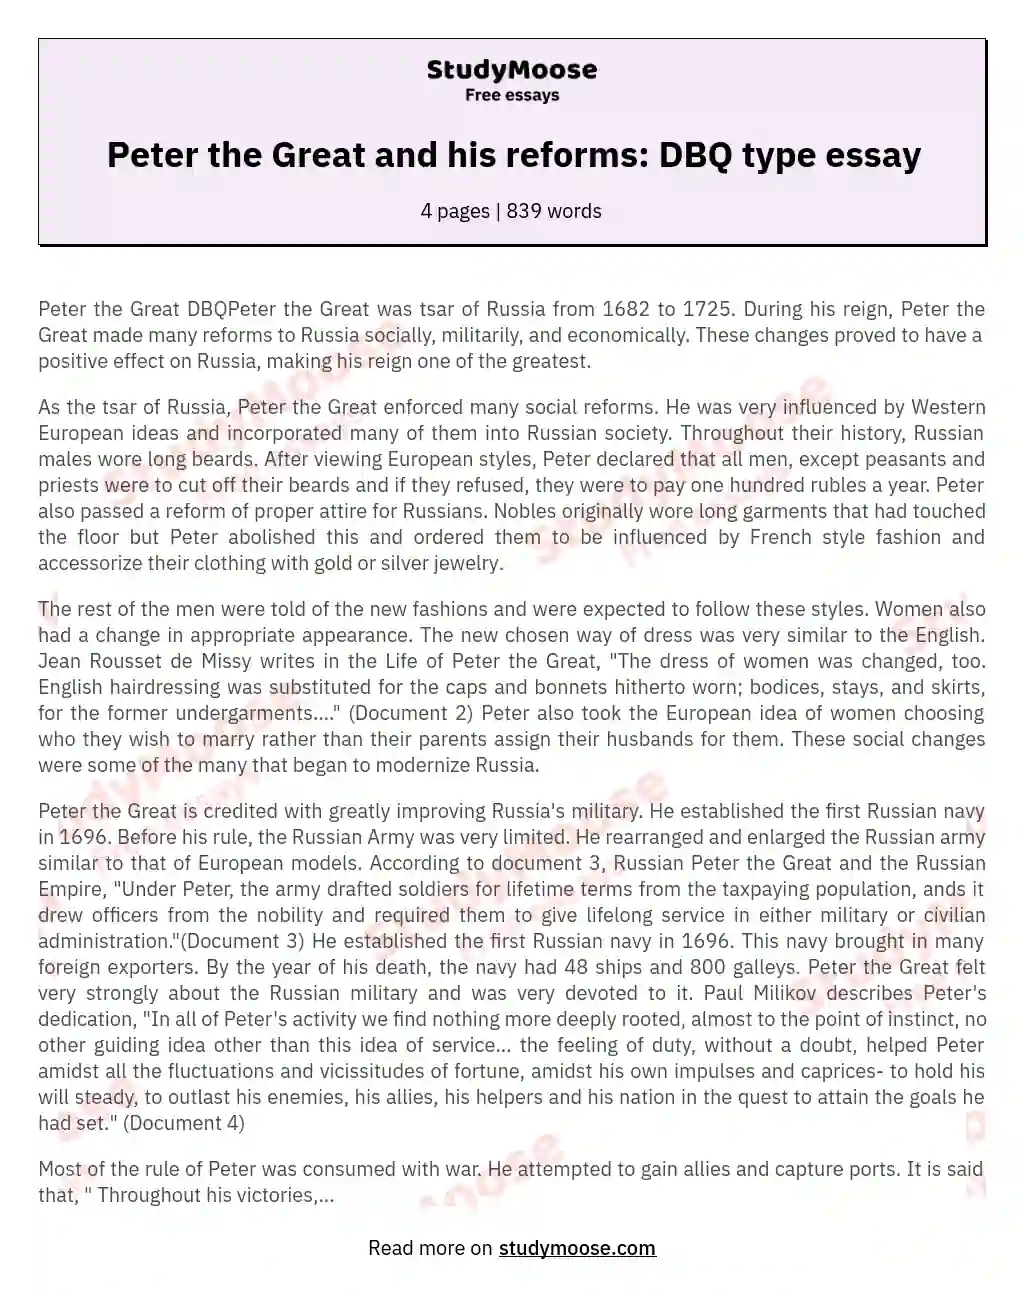 Peter the Great and his reforms: DBQ type essay